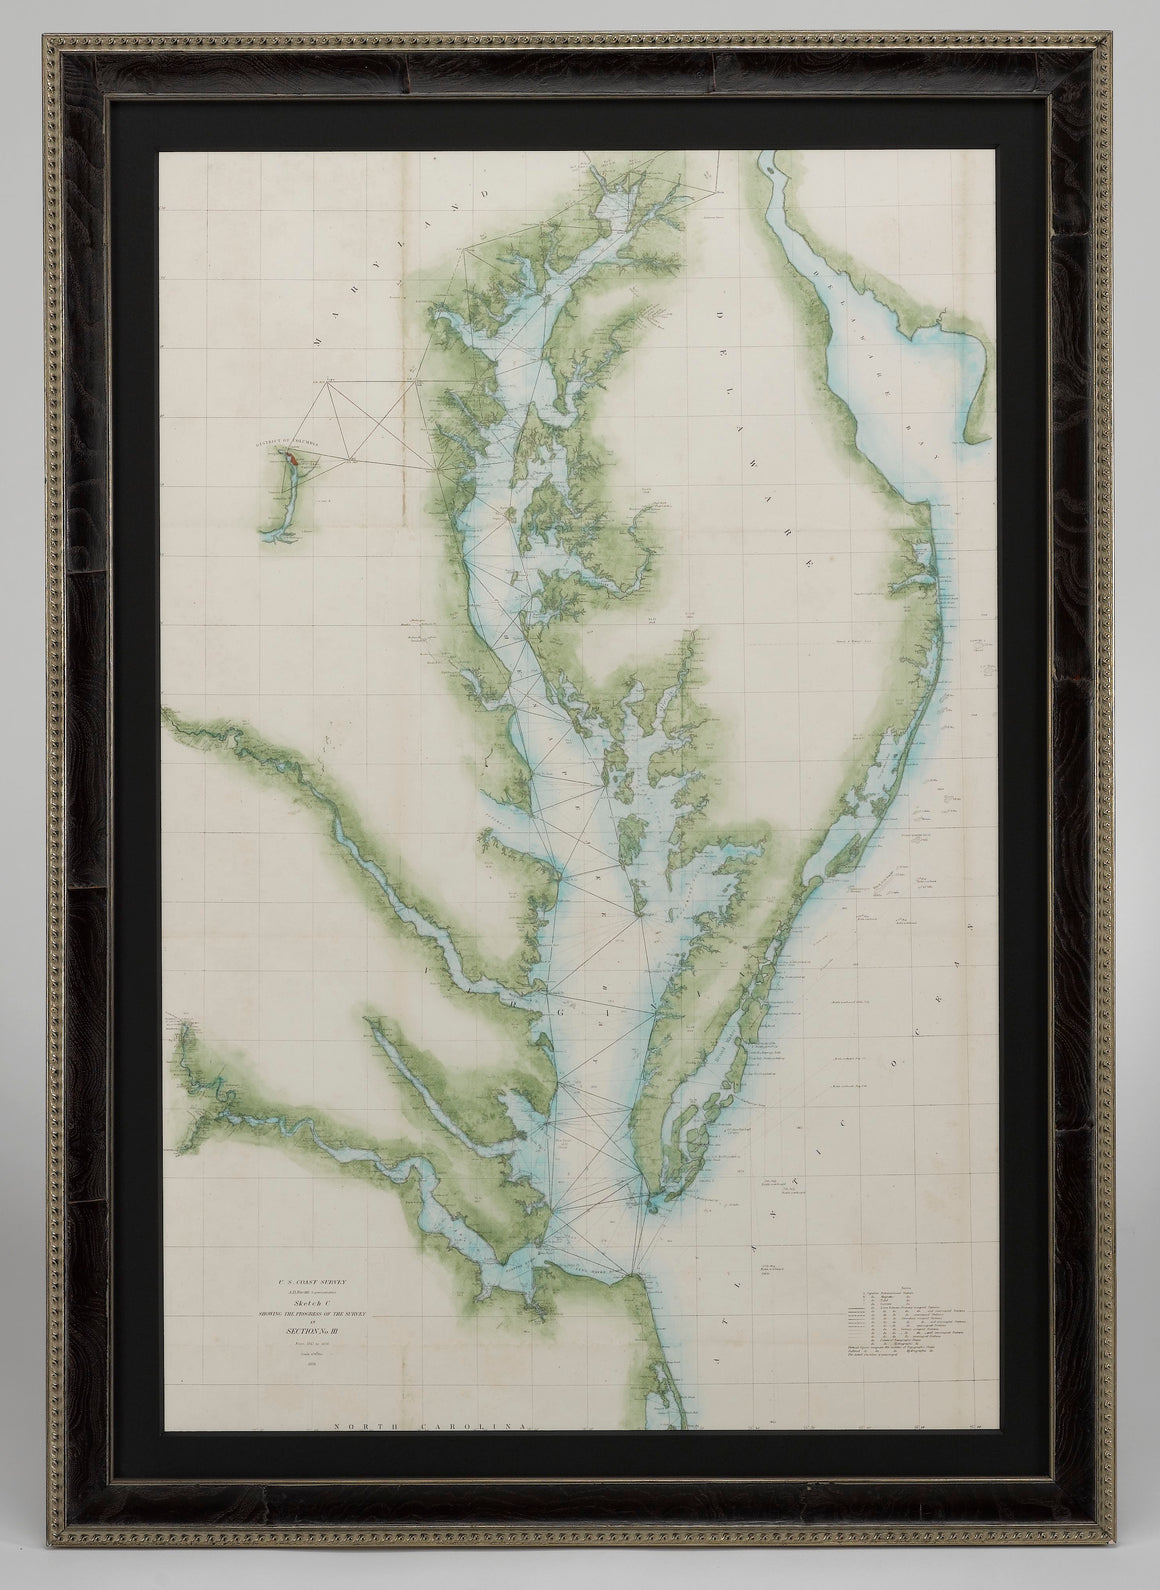 1856 "U.S. Coast Survey Map of Chesapeake Bay and Delaware Bay" by A. D. Bache.